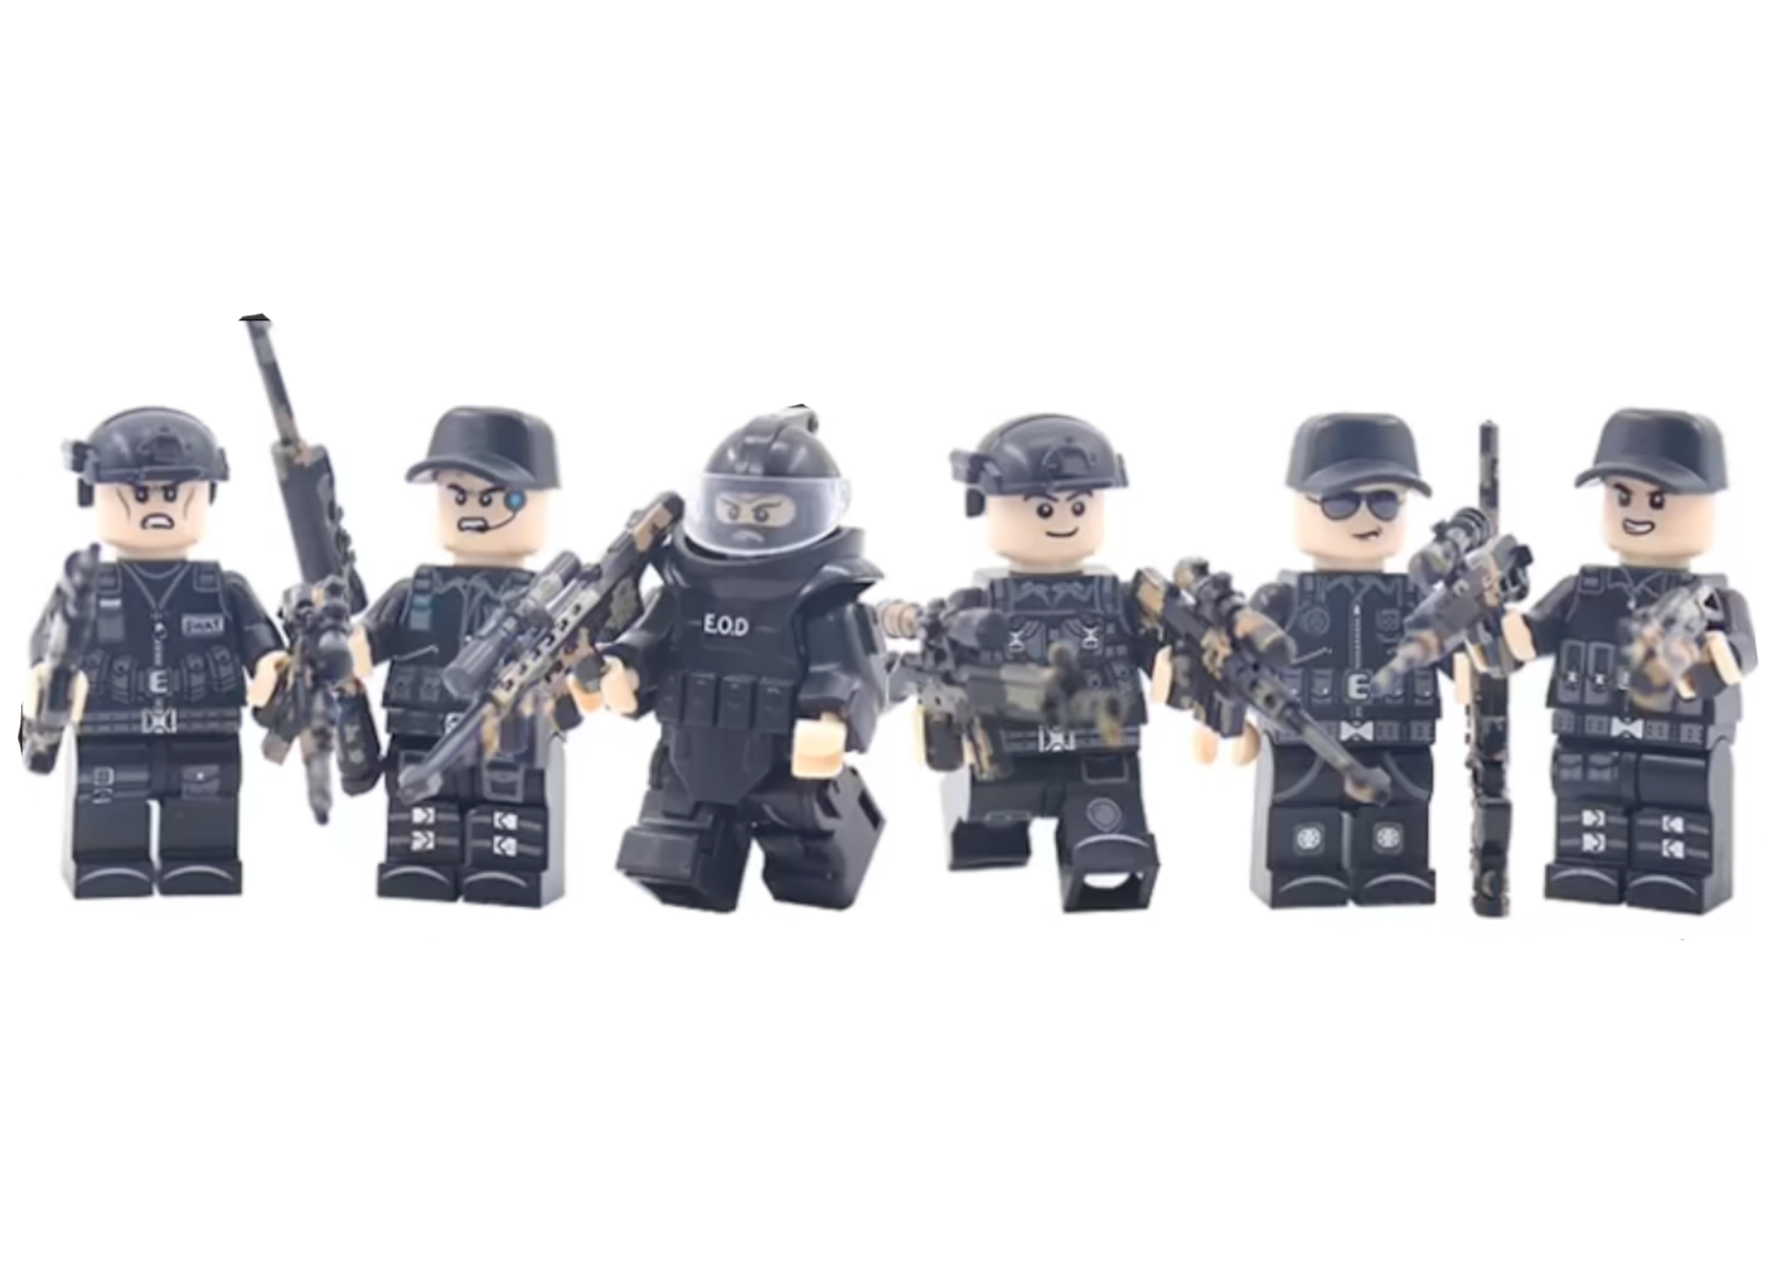 U.S. CIA Special Operations Group (6 Figures)